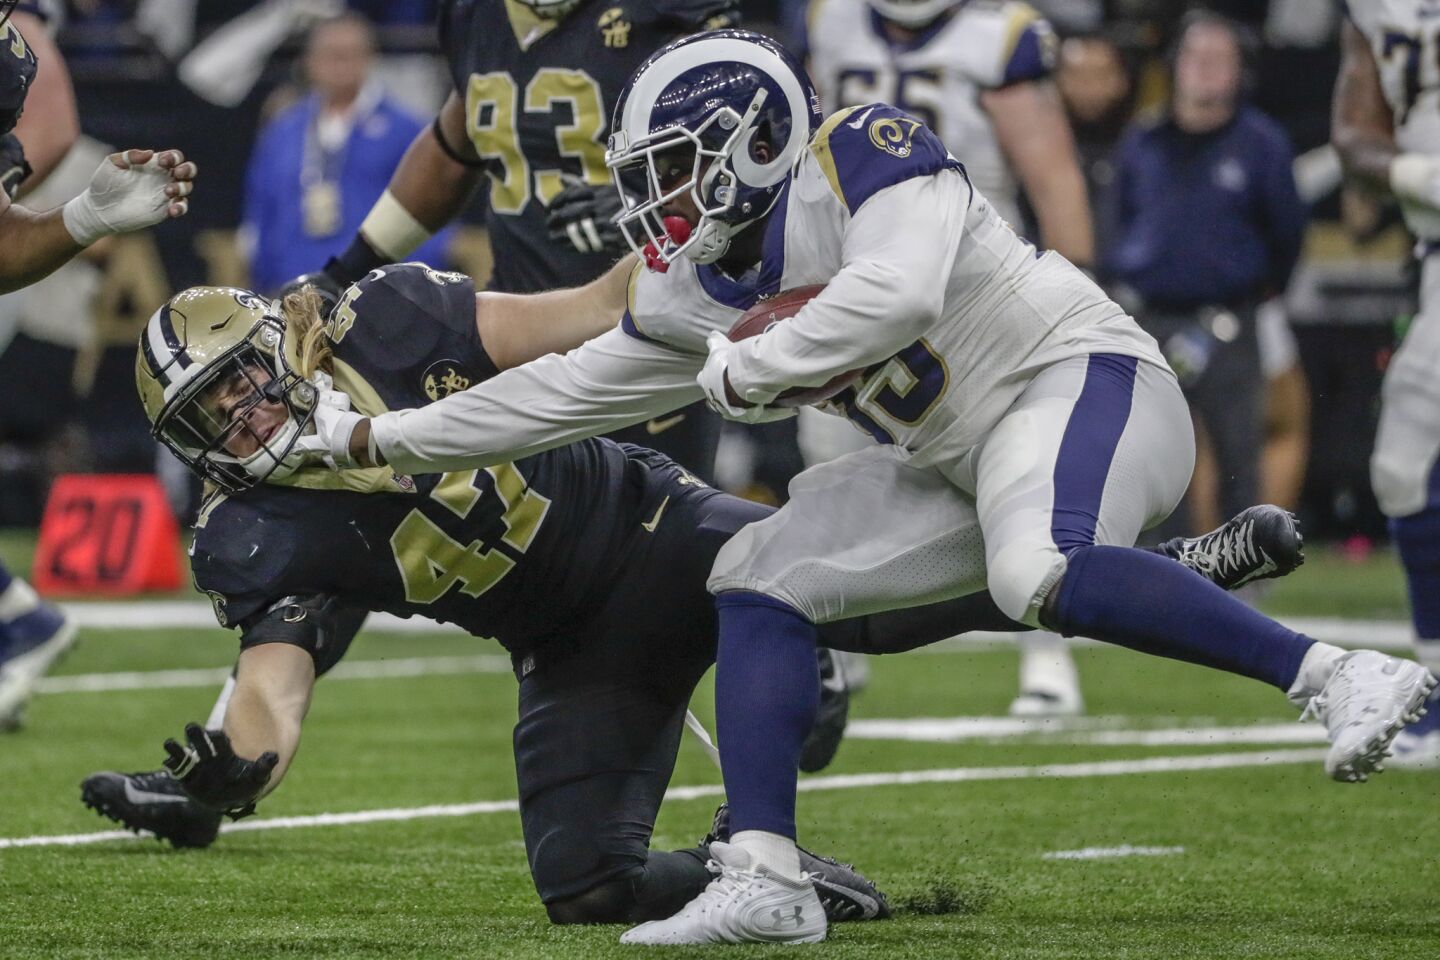 Rams running back CJ Anderson stiff arms New Orleans Saints linebacker Alex Anzalone for a short gain during a second half drive in the NFC Championship at the Superdome.